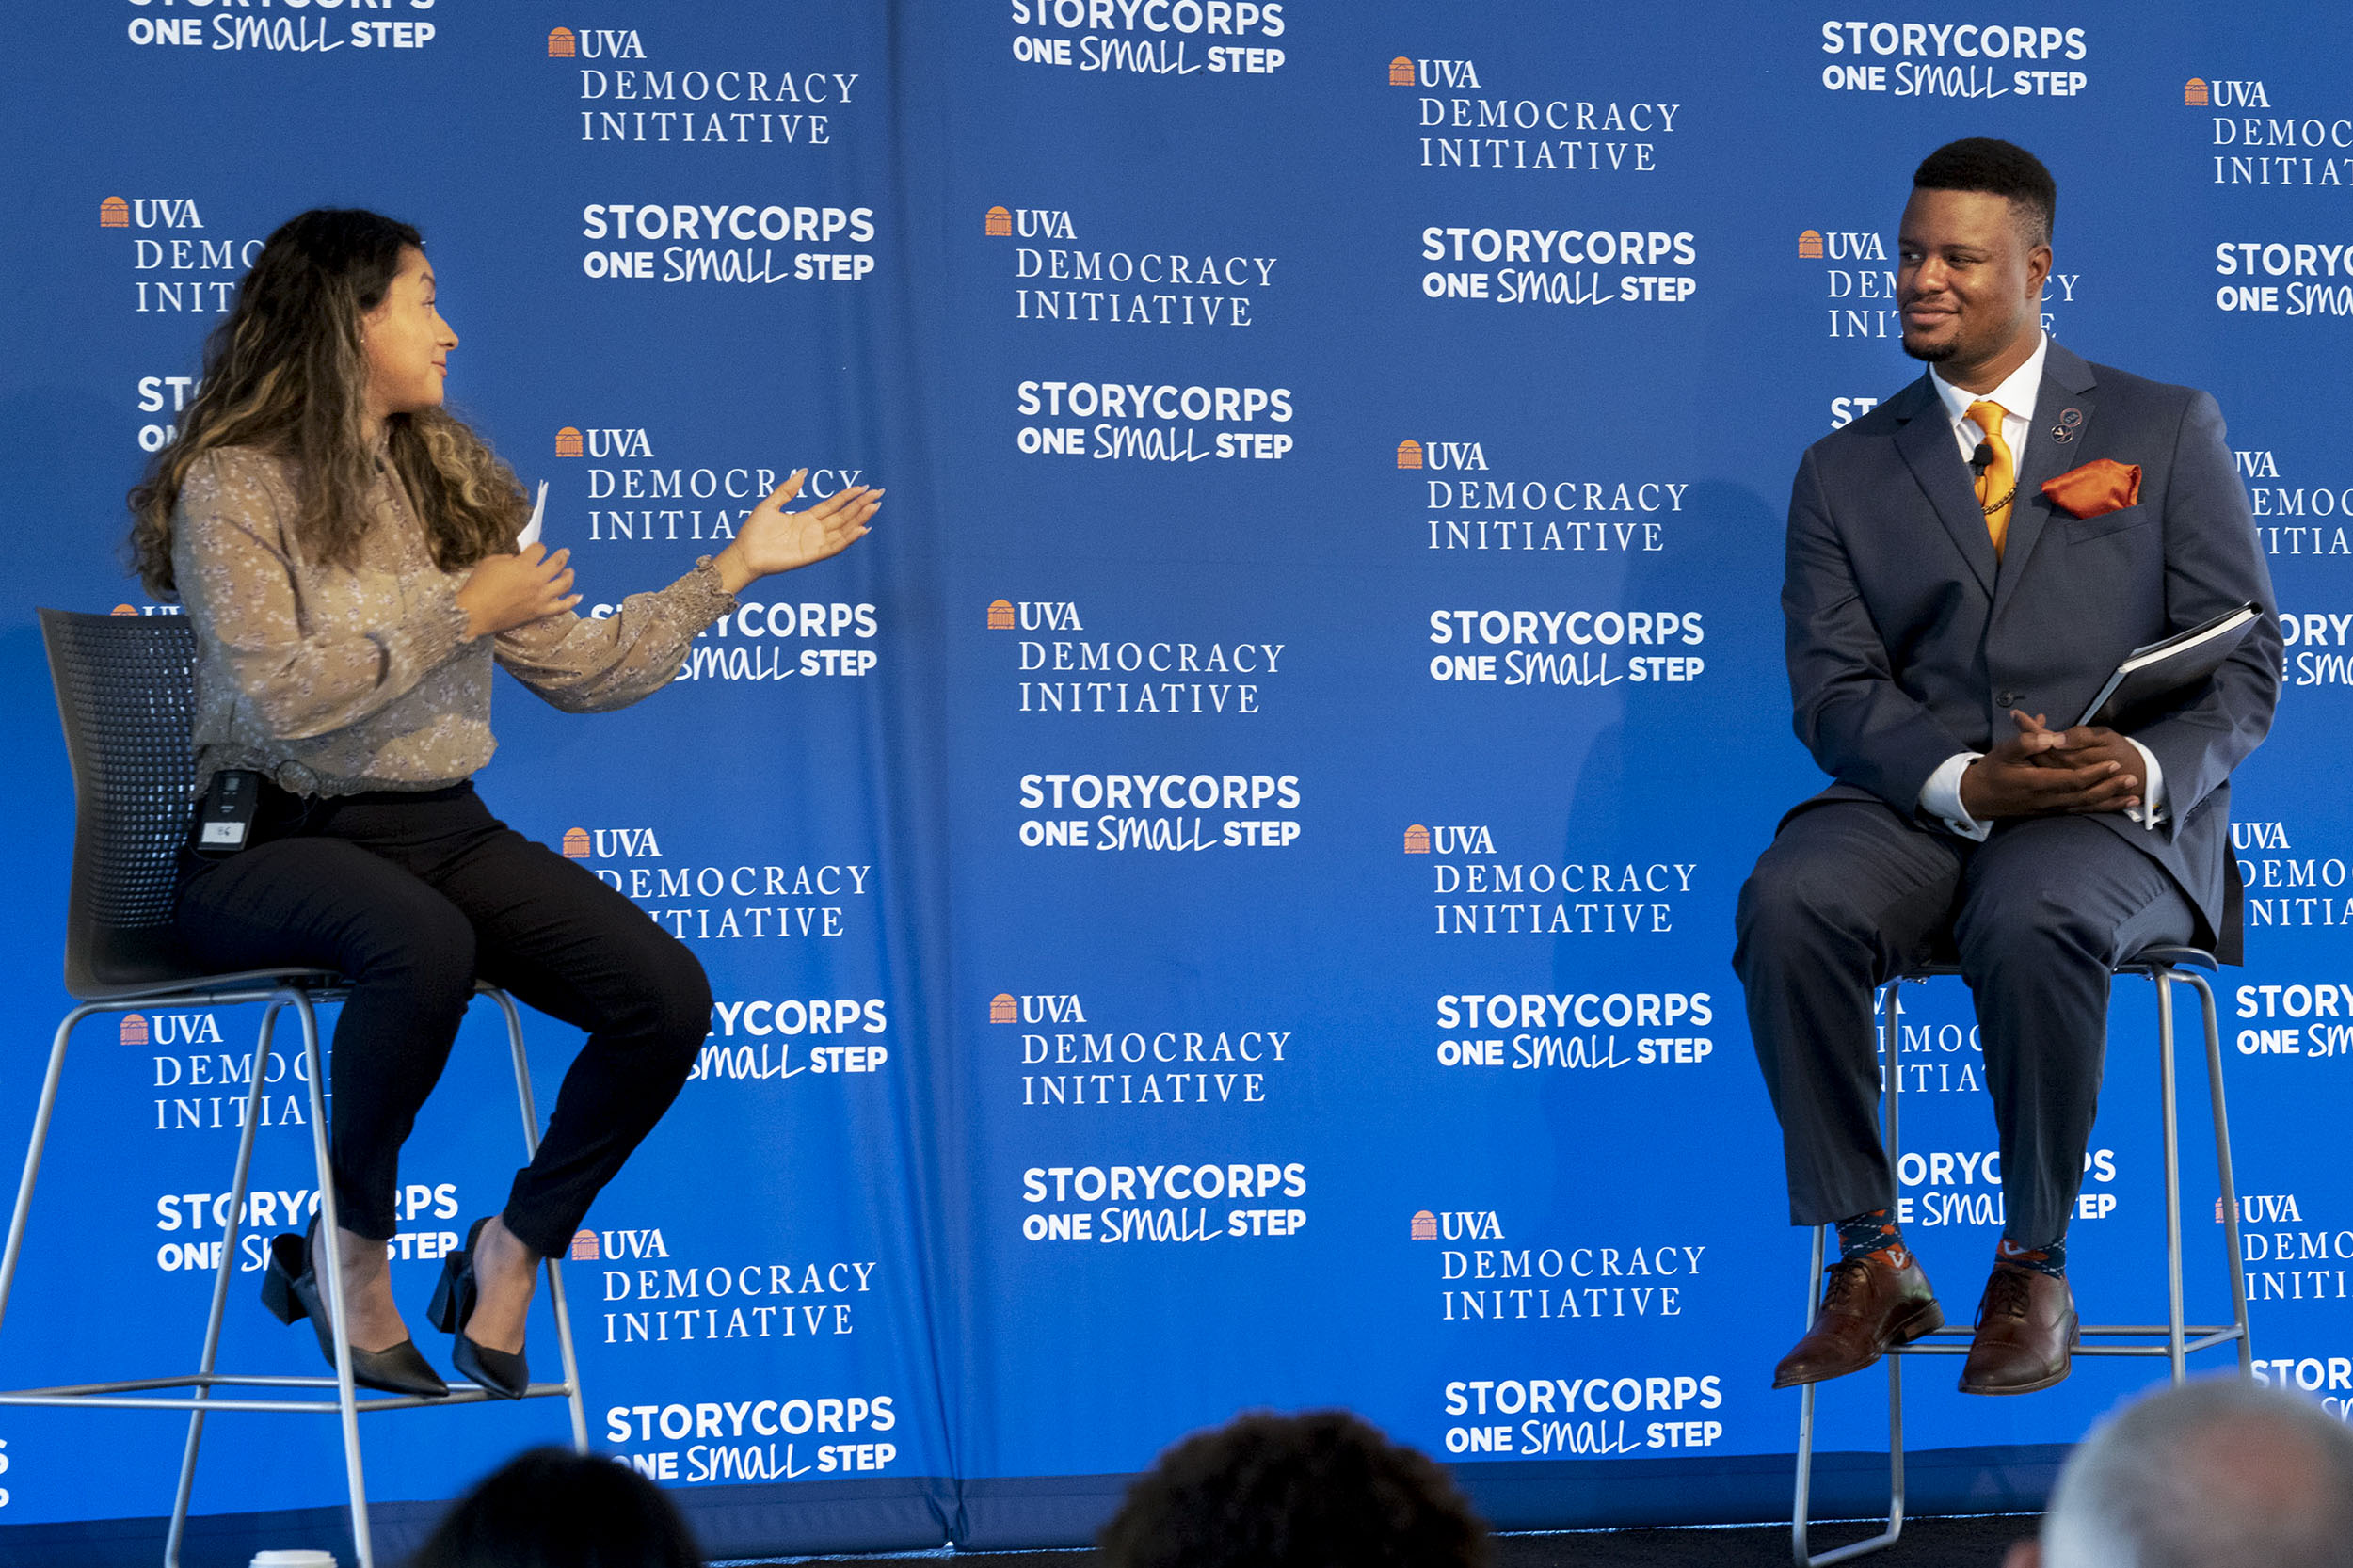 Diana Moreno (left) and Marquis Rice(right) speaking on stage to each other in front of a crowd